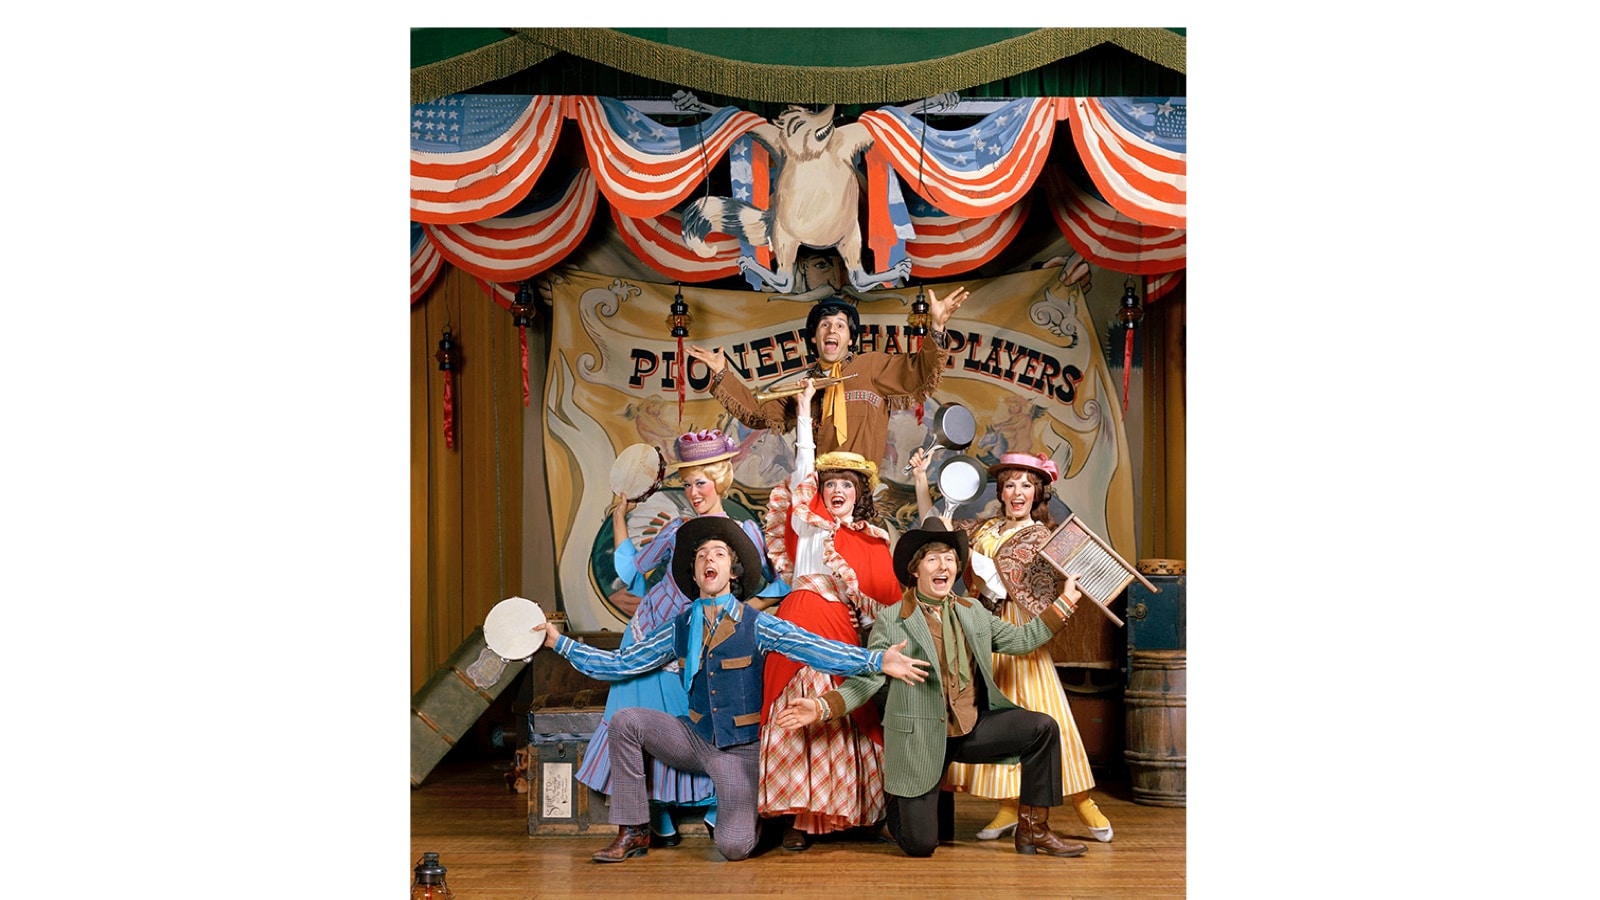 Still 'Corny' After All These Years – Hoop-Dee-Doo Revue Celebrates its 45th Anniversary | Disney Parks Blog